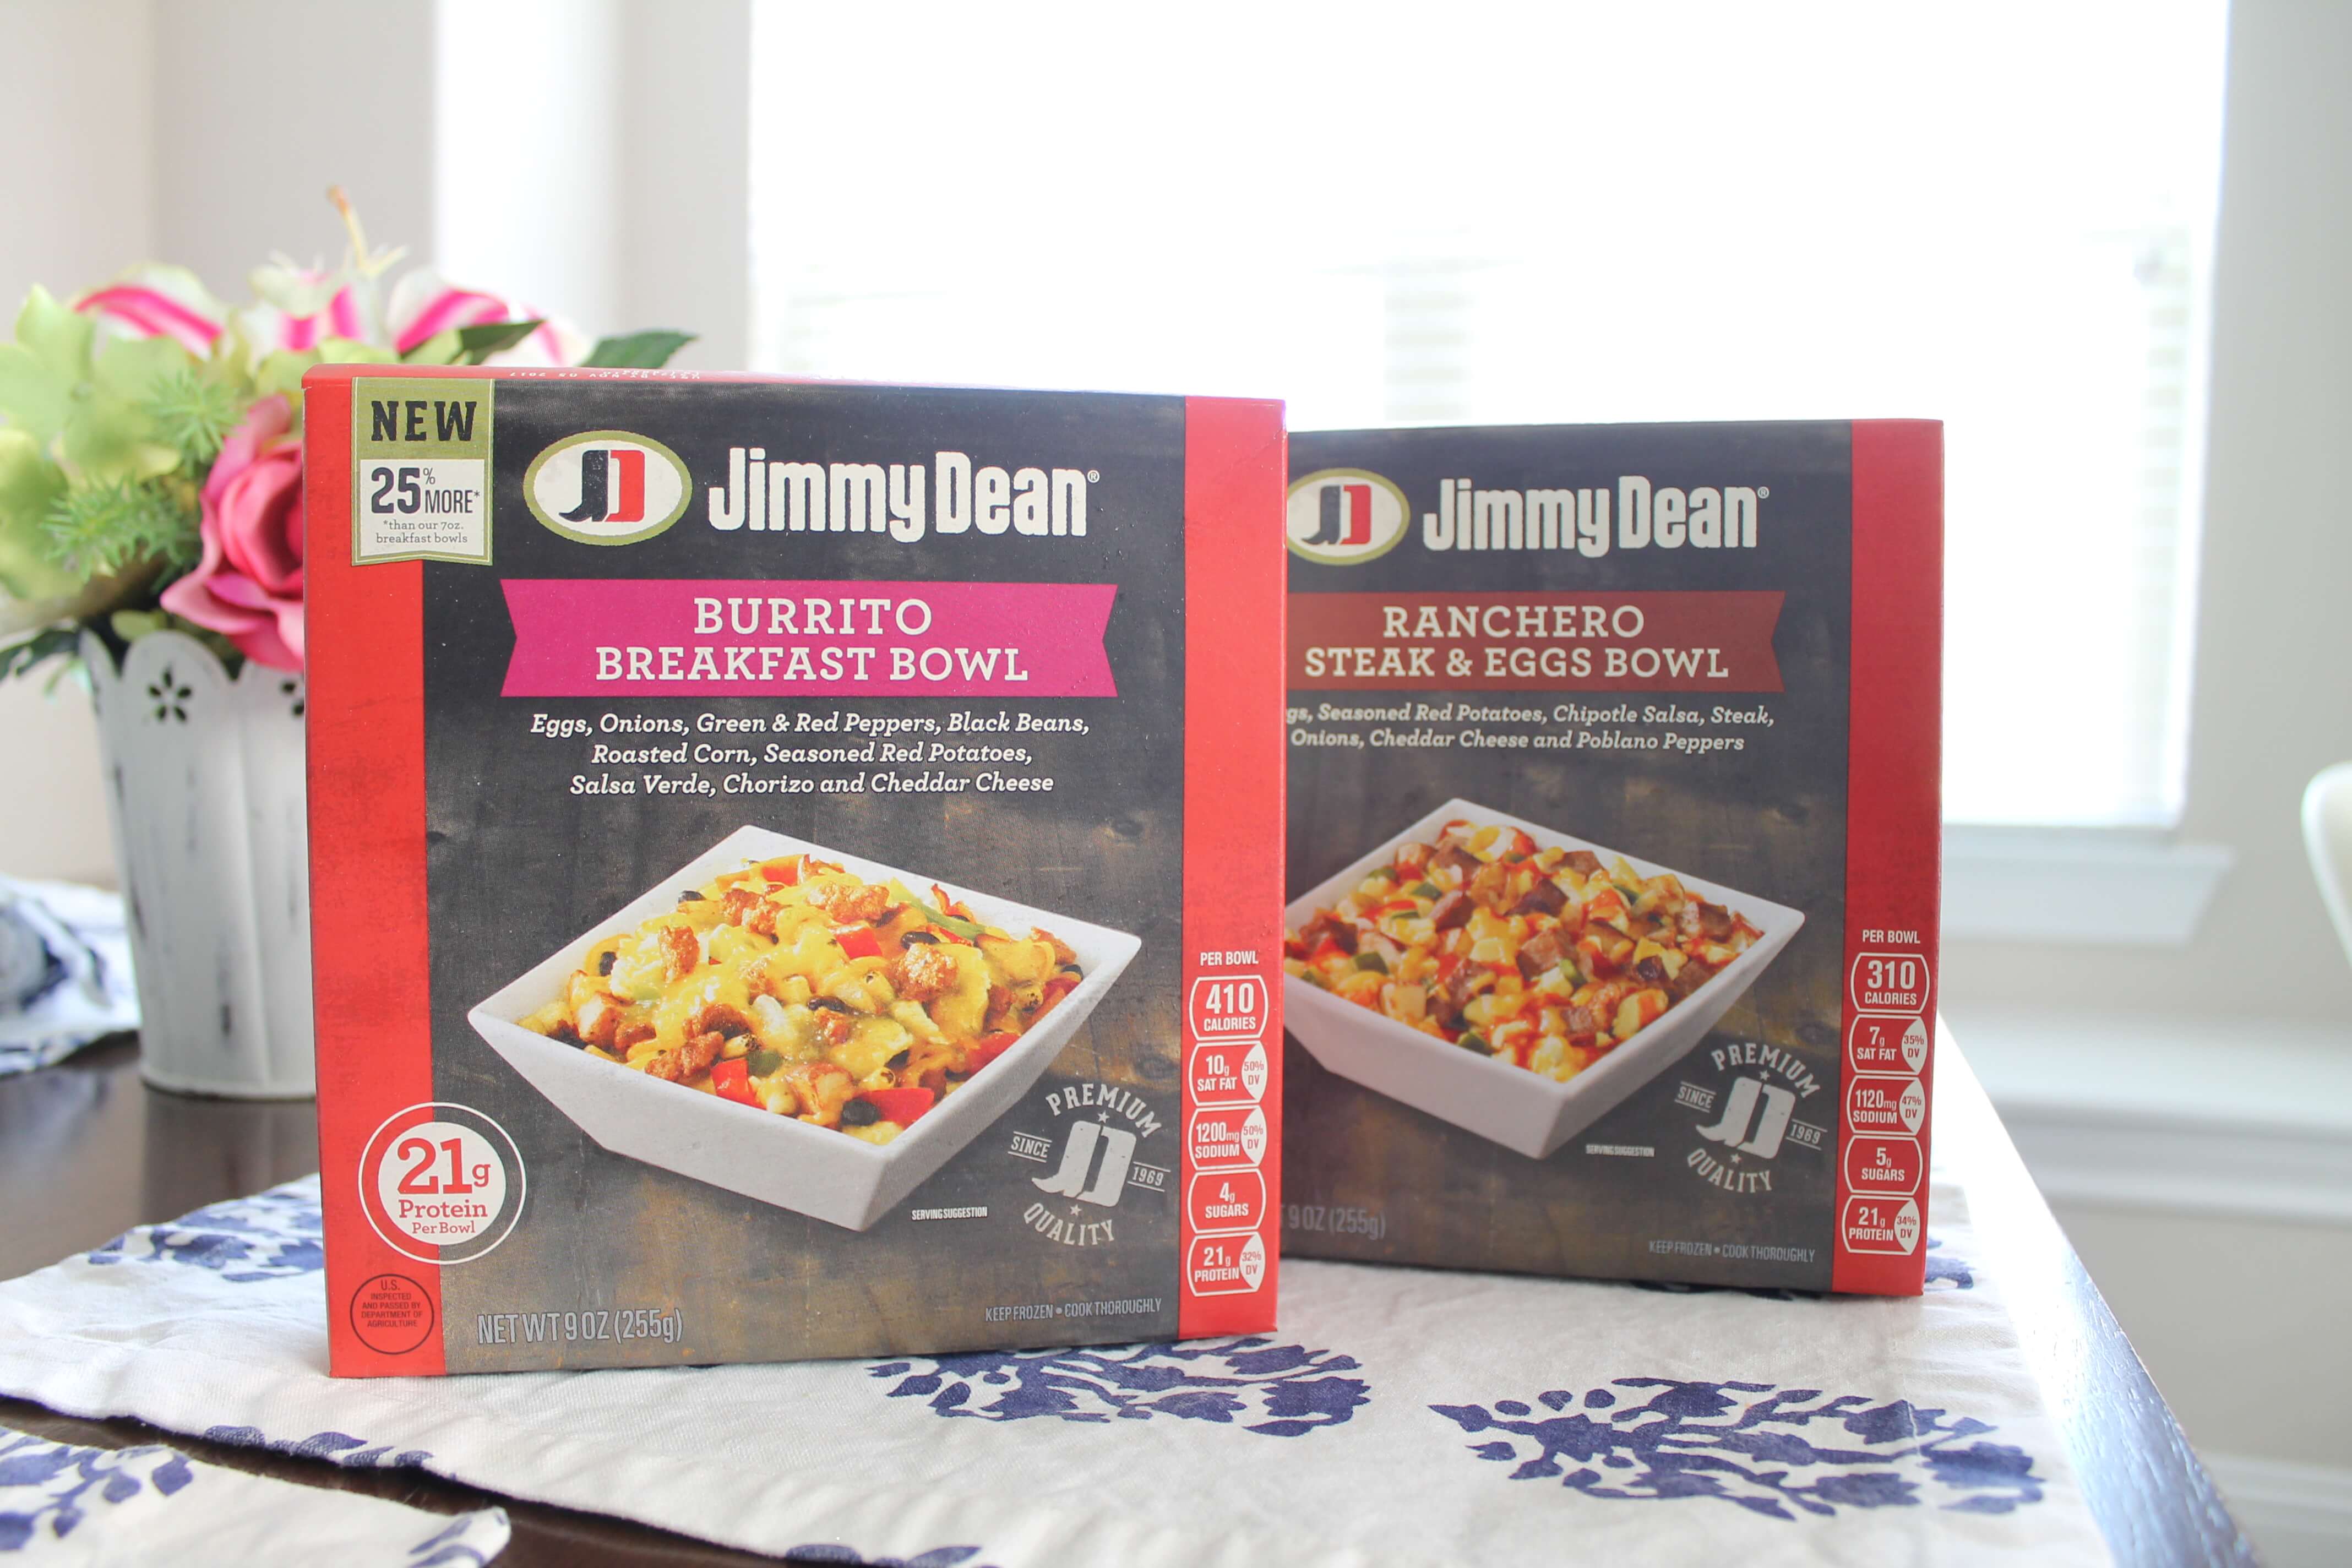 7 ways to be a better stay at home mom. Great tips we all know but need to be reminded of, including eating! These Jimmy Dean breakfast bowls are delicious and easy! #ad #jimmydeanbowls #sahm